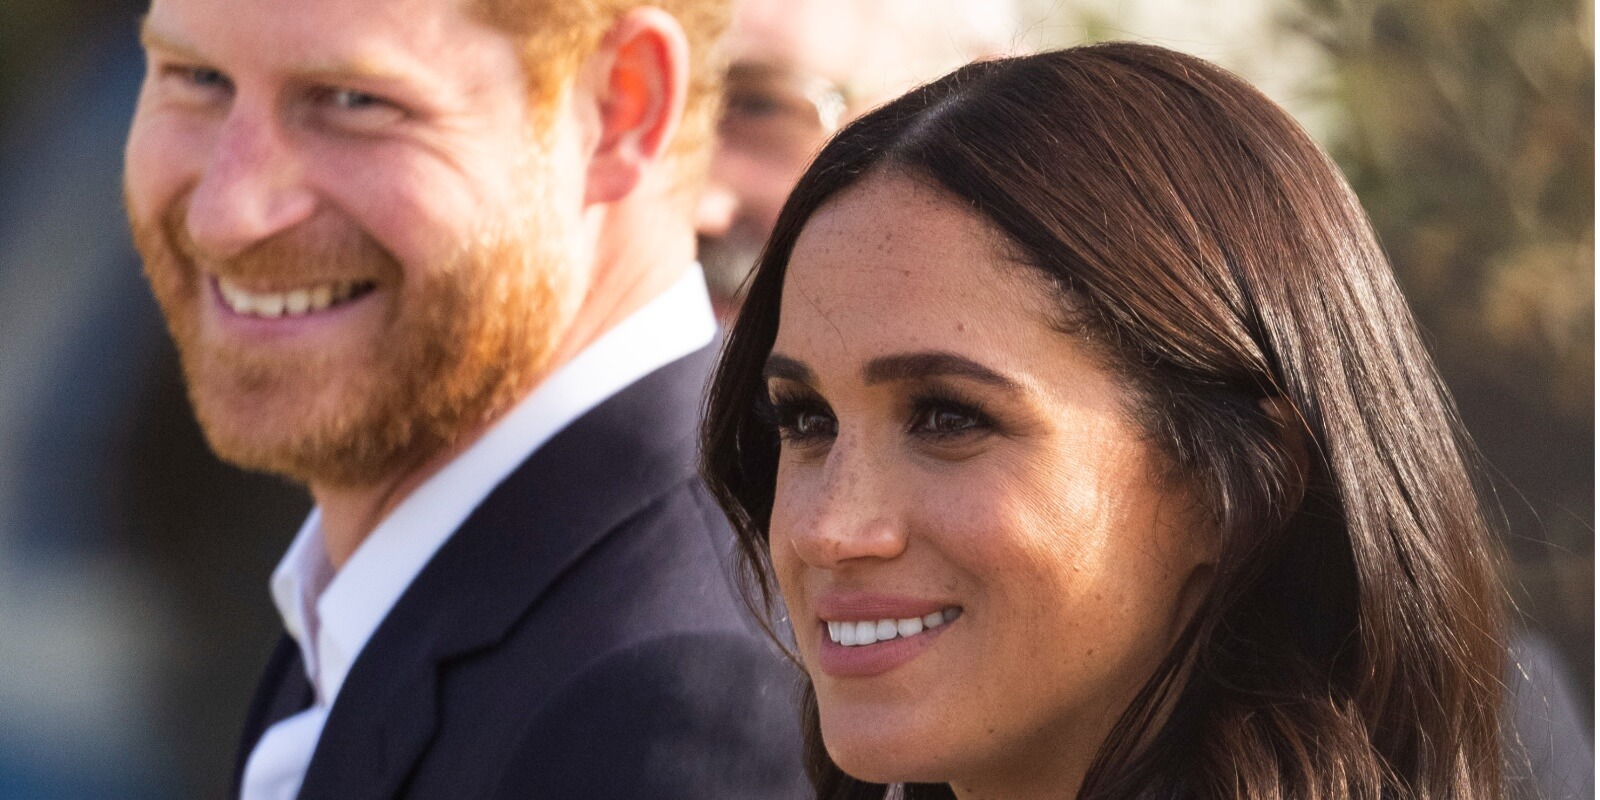 Prince Harry and Meghan Markle attend a reception hosted by the City of The Hague and the Dutch Ministry of Defence at Zuiderpark on April 15, 2022 in The Hague, Netherlands.